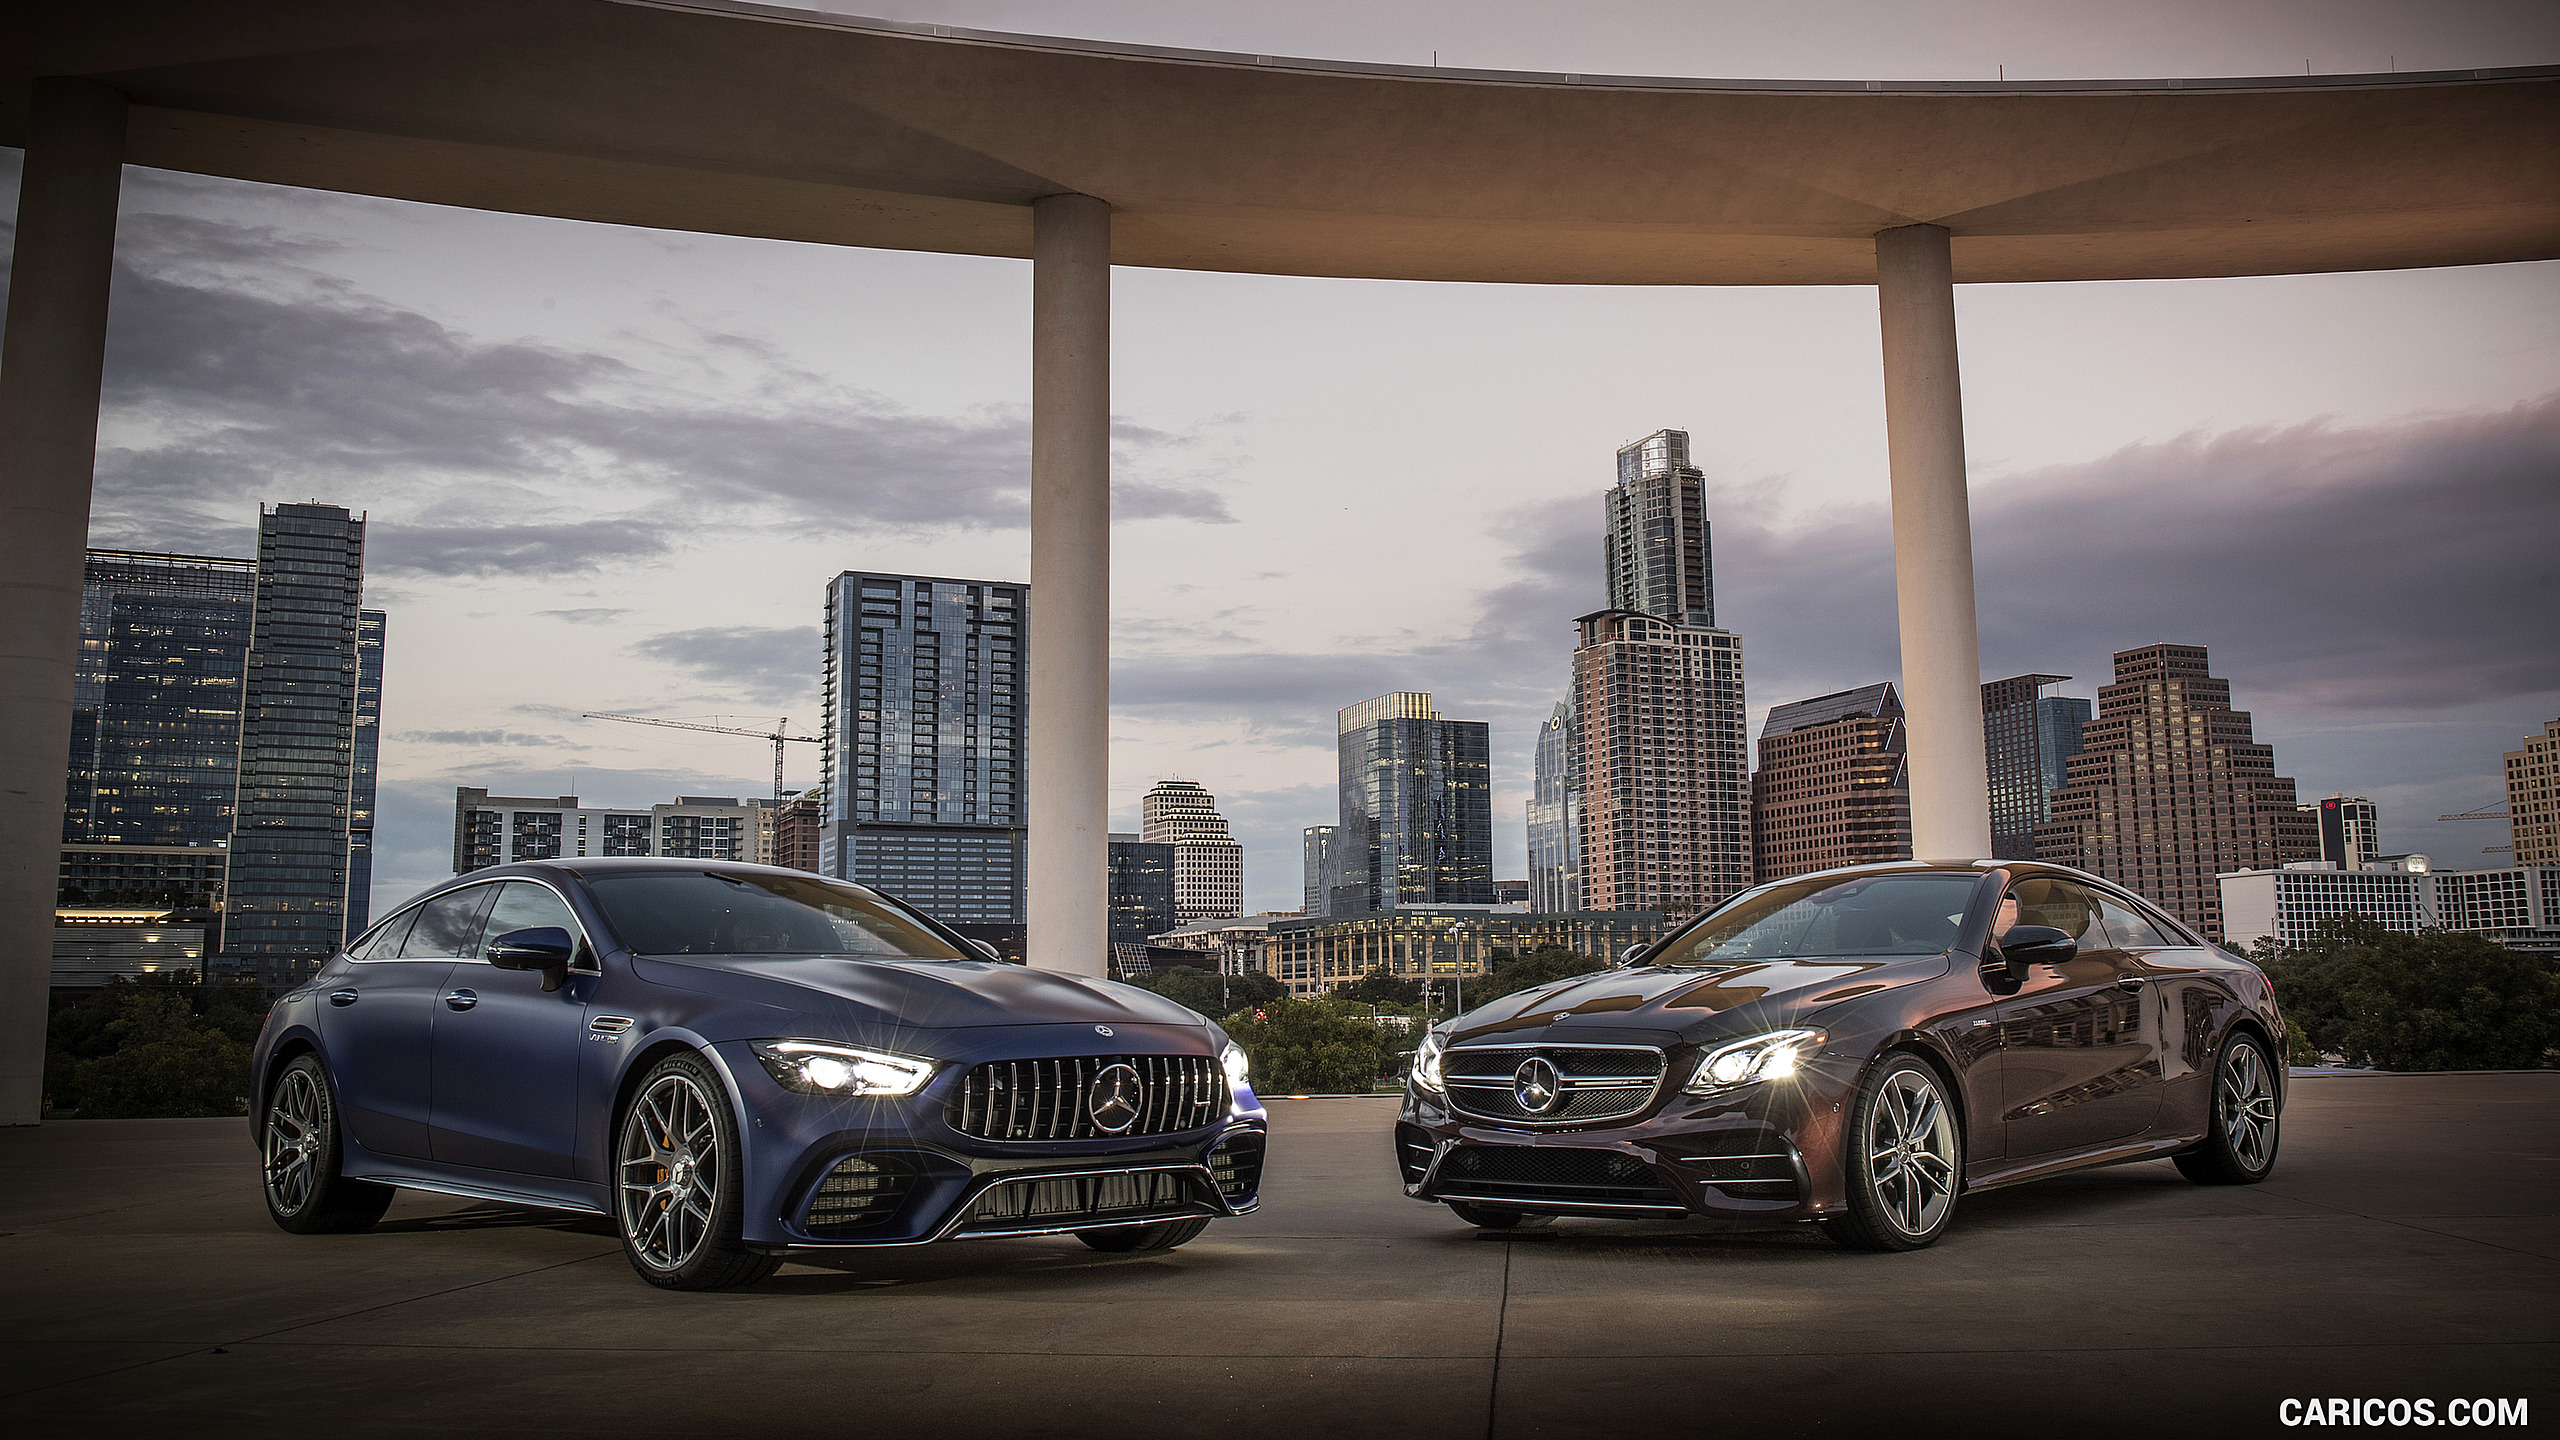 2019 Mercedes-AMG E 53 4MATIC+ Coupe (US-Spec) Wallpaper and AMG GT 4-Door Coupe, #153 of 193